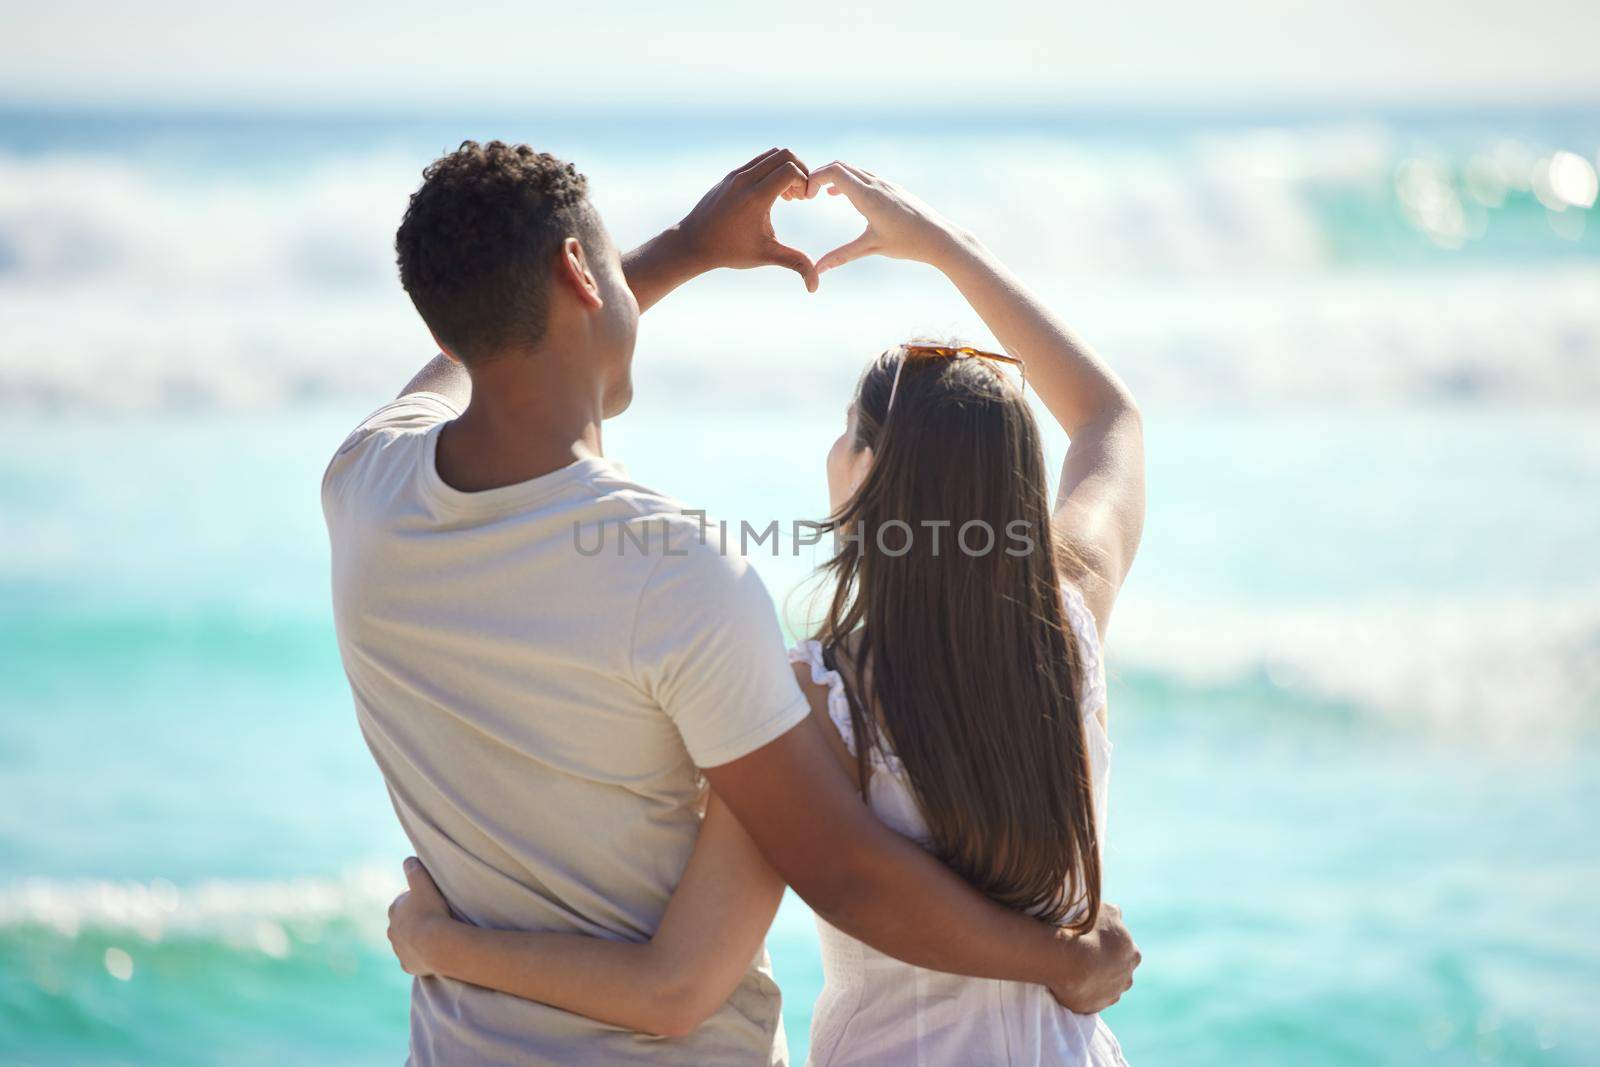 Shot of a young couple making a heart gesture with their hands at the beach.